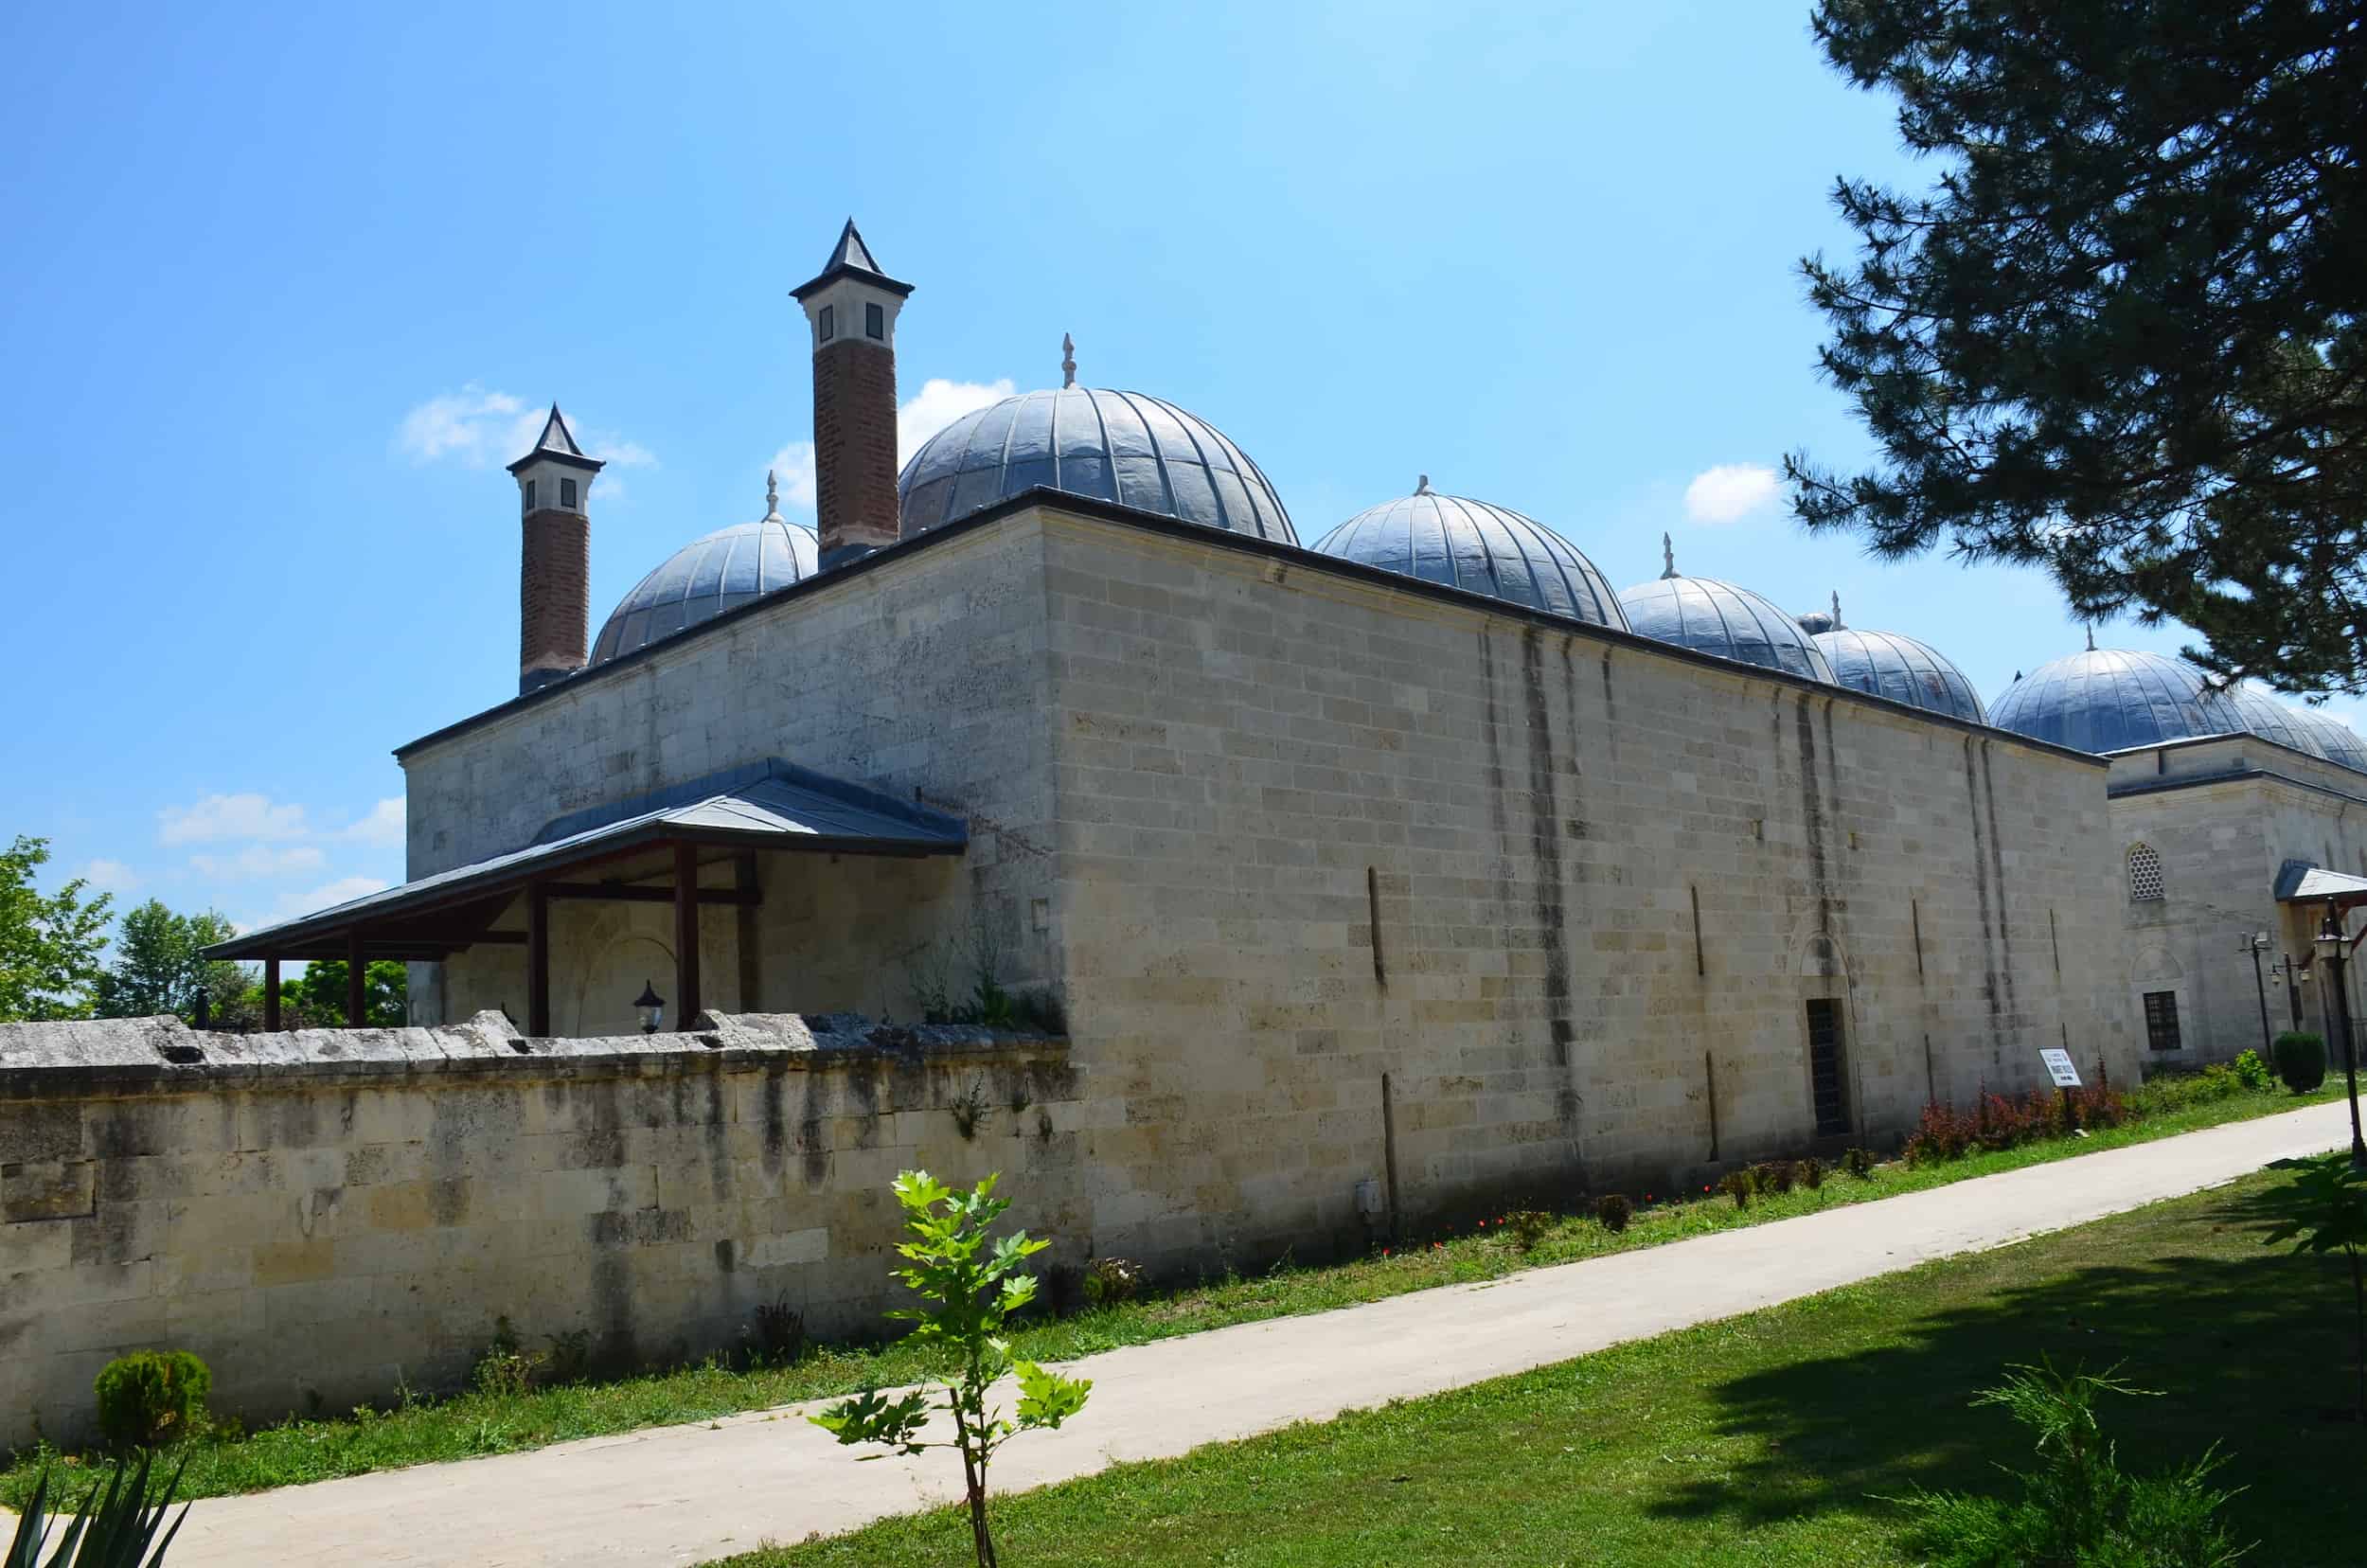 Pantry at the Bayezid II Complex in Edirne, Turkey